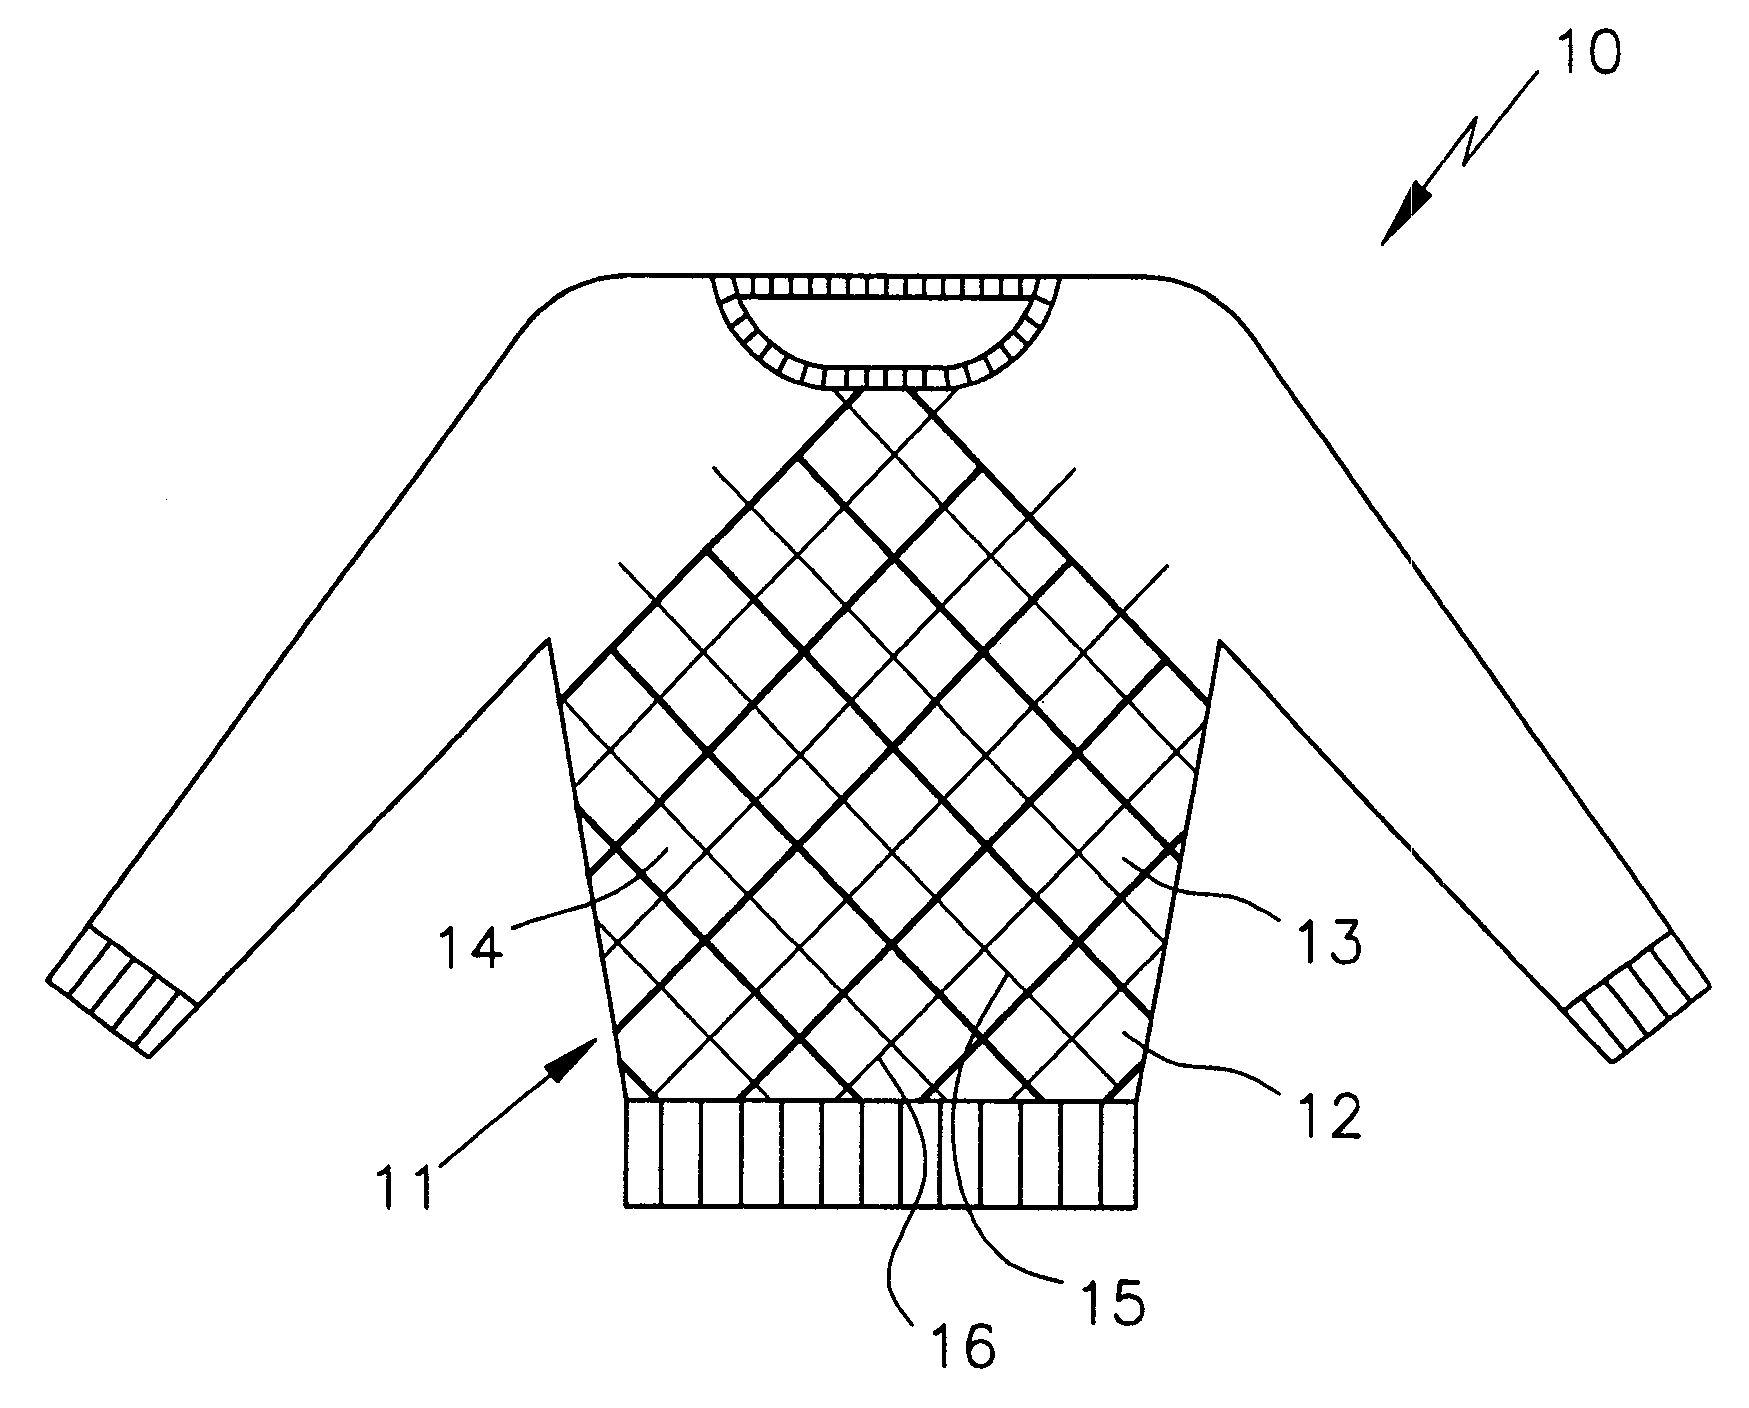 Method for the manufacture of knitted fabrics with intarsias and decorative stitches